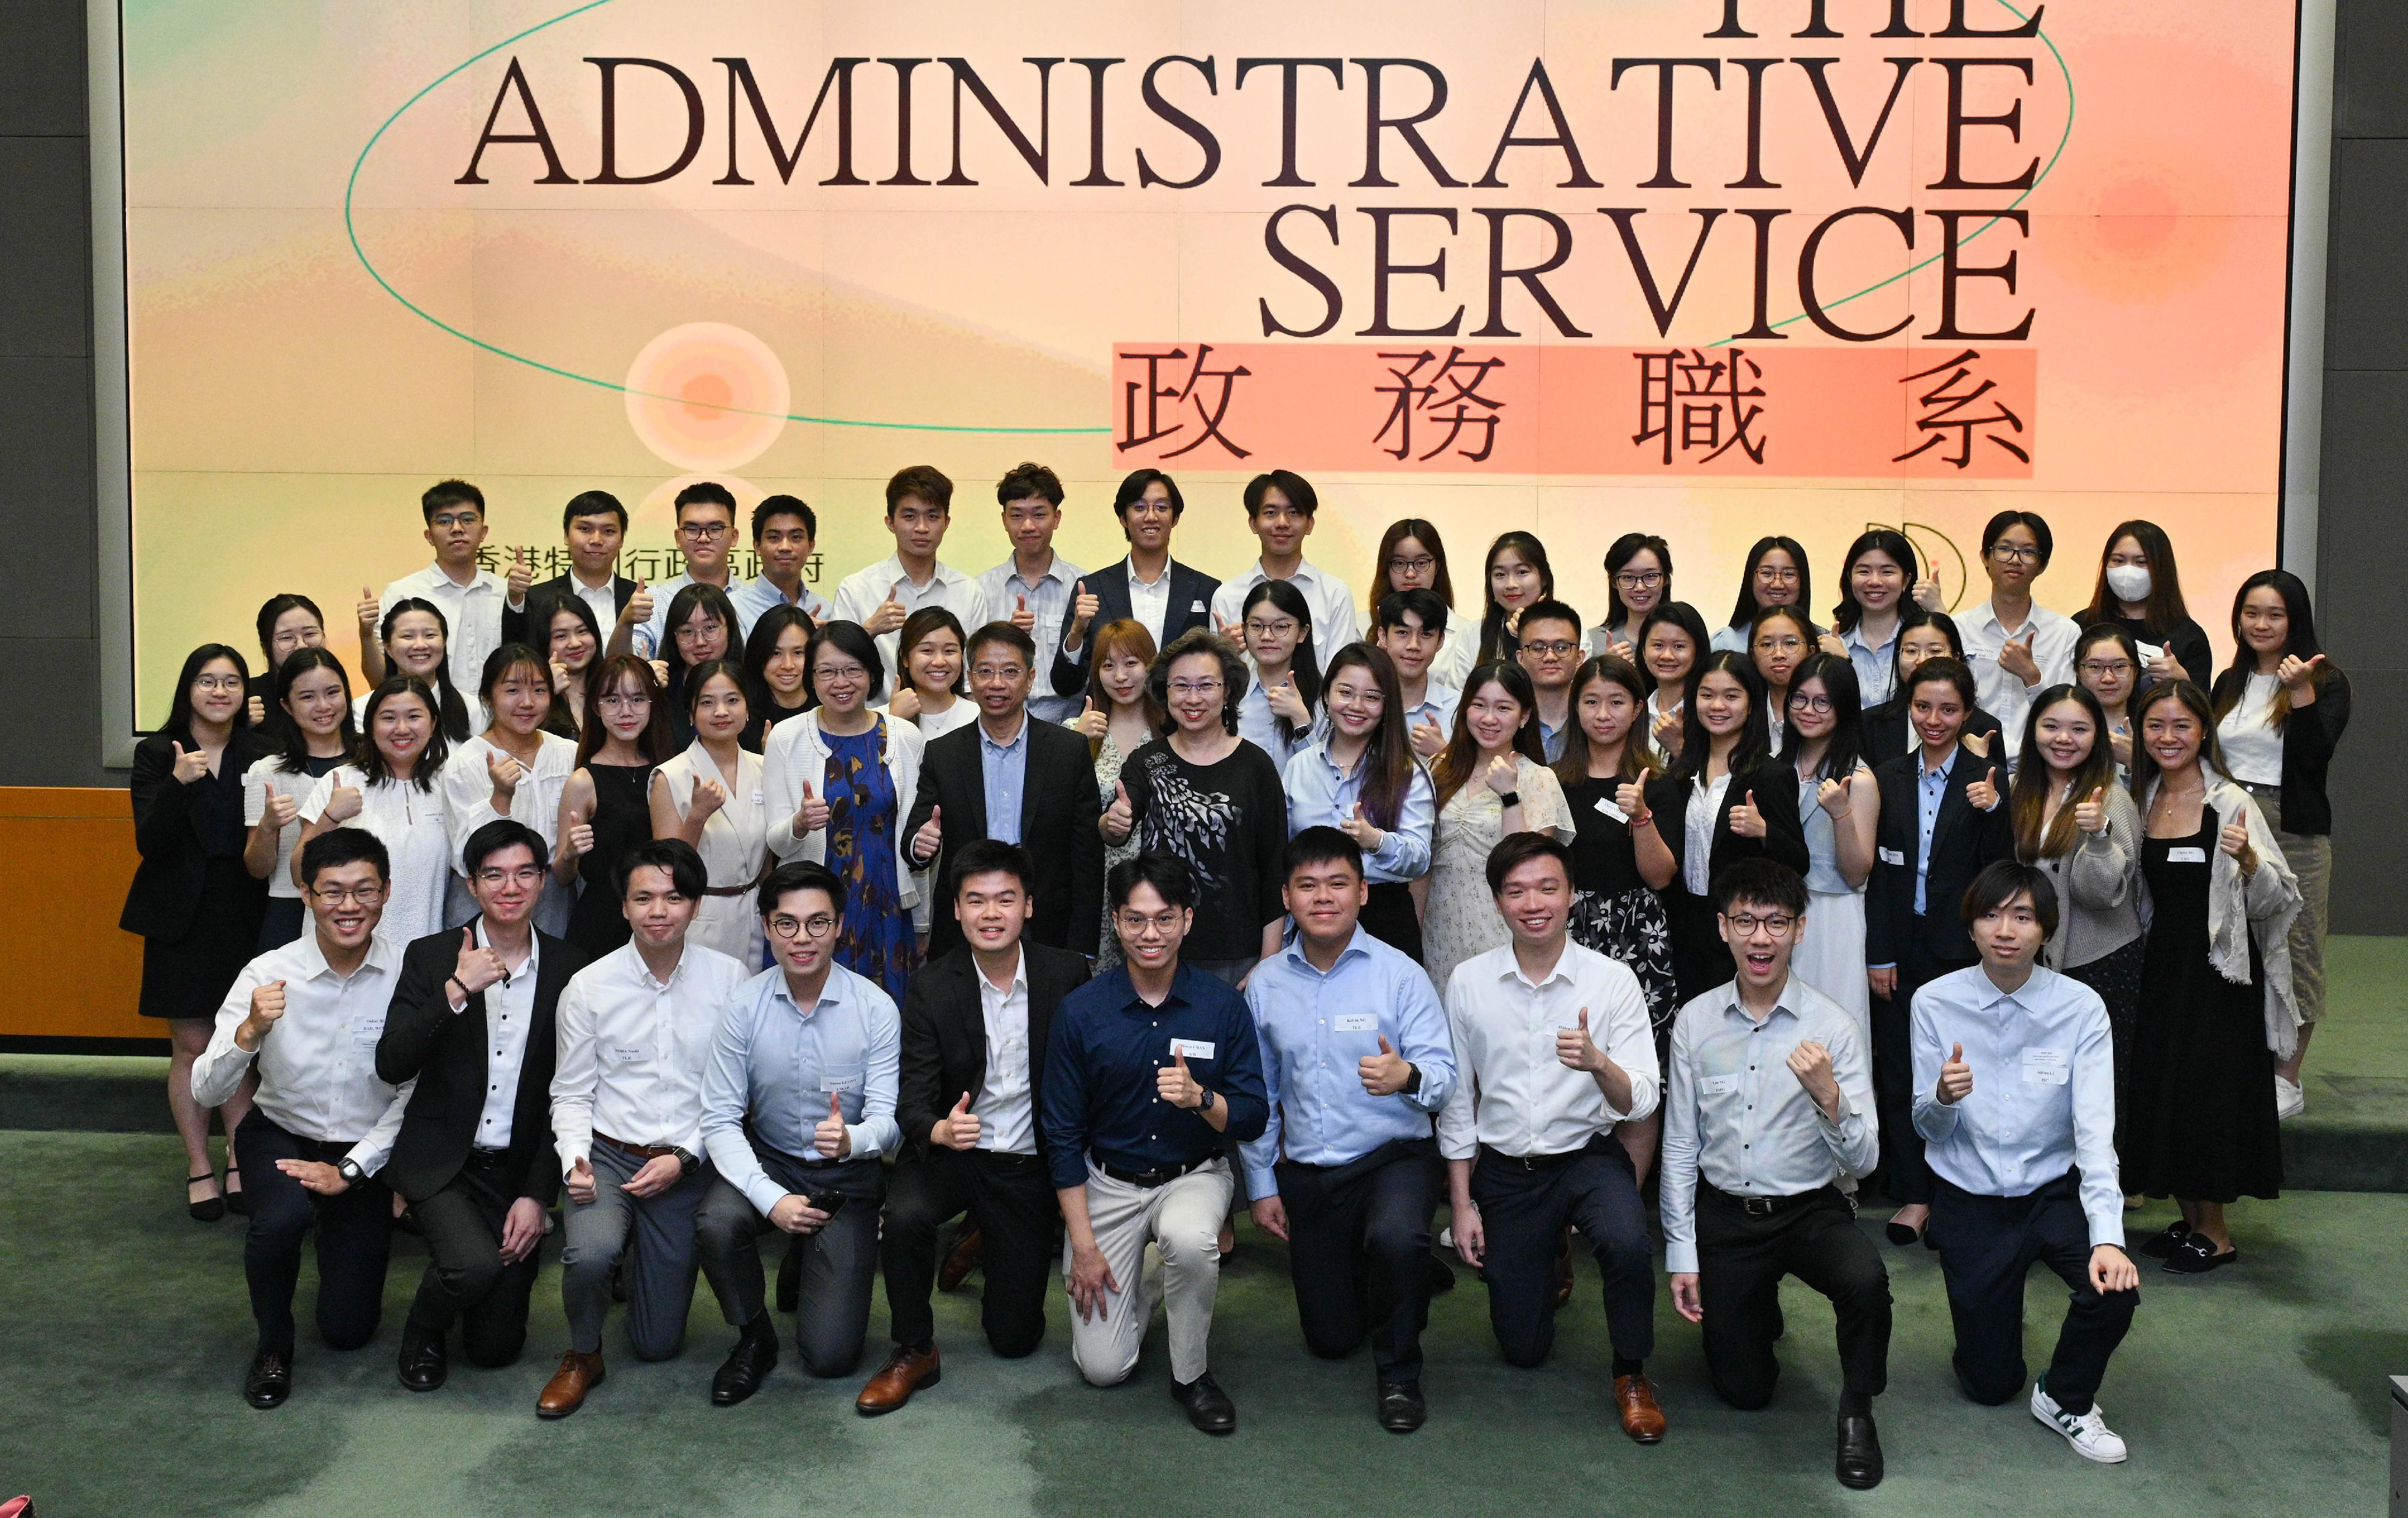 The Secretary for the Civil Service, Mrs Ingrid Yeung (second row, ninth right), and the Permanent Secretary for the Civil Service, Mr Clement Leung, (second row, tenth right), today (August 1) meet and interact with more than 50 university students participating in the Administrative Service Summer Internship Programme to encourage them to apply for civil service positions such as the Administrative Officer post.